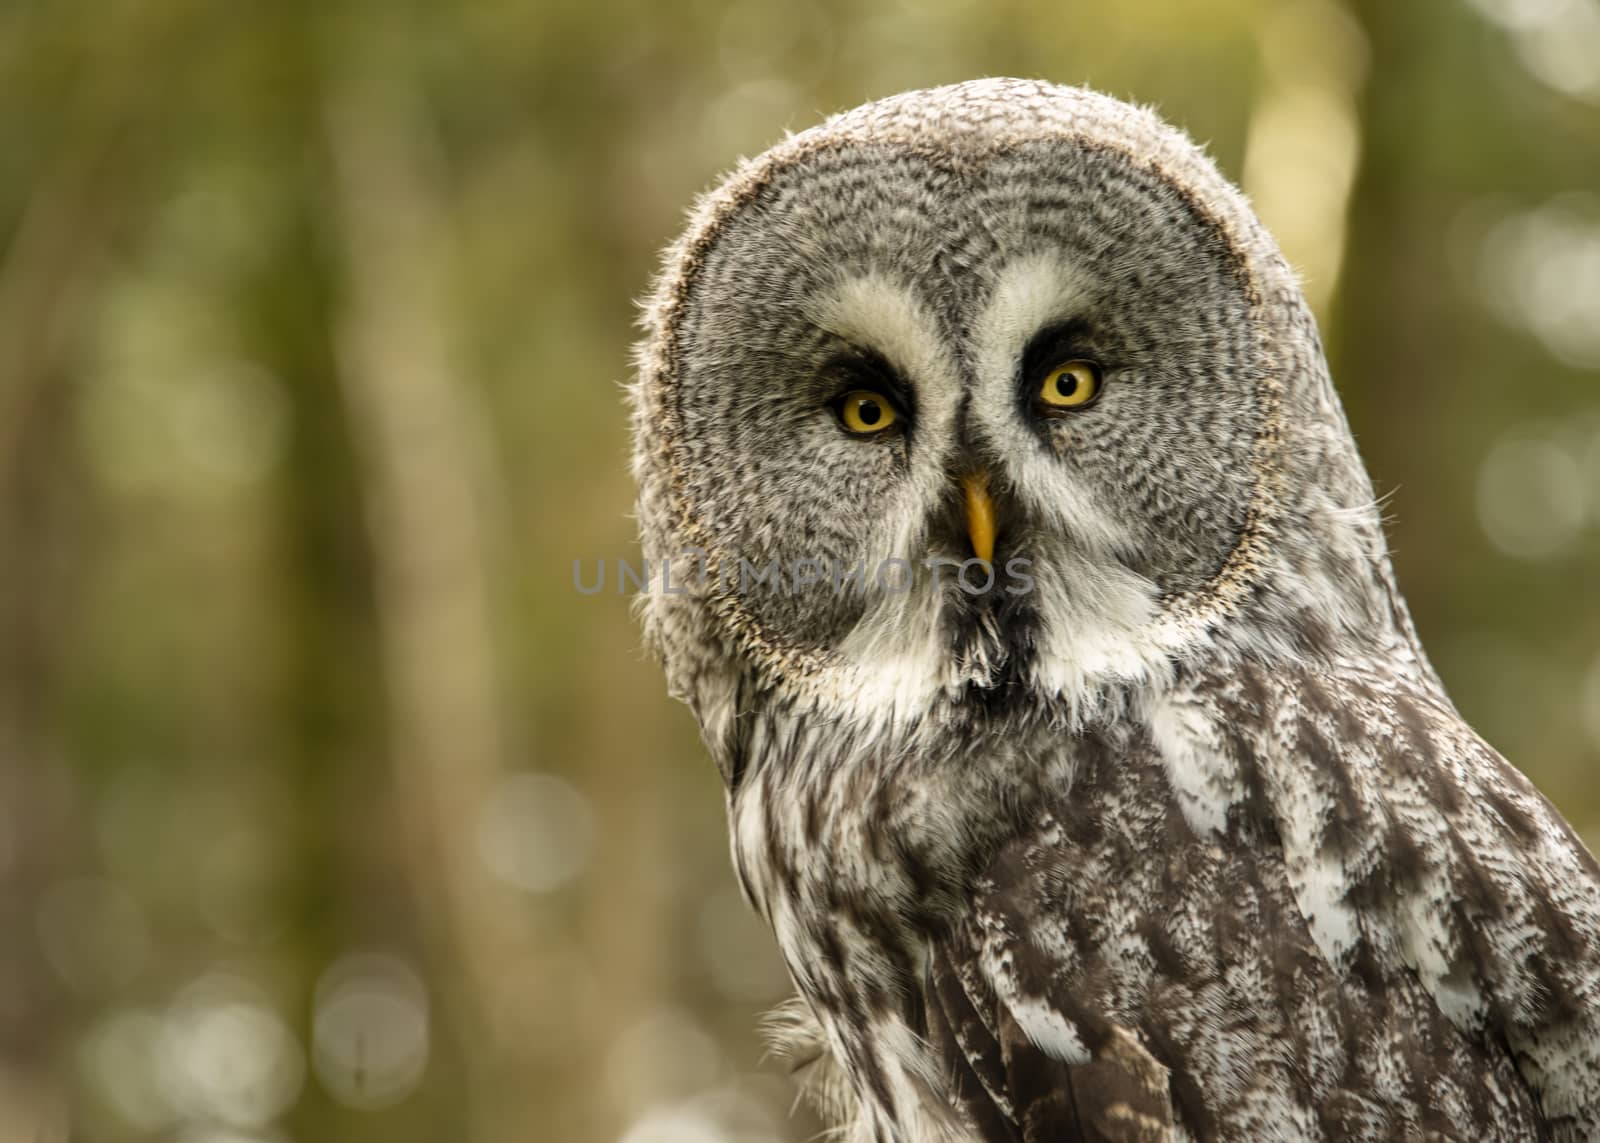 UK, Sherwood Forrest, Nottinghamshire  Birds of Prey Event - October 2018: Great Grey Owl in captivity. The great grey owl is documented as the world's largest species of owl by length